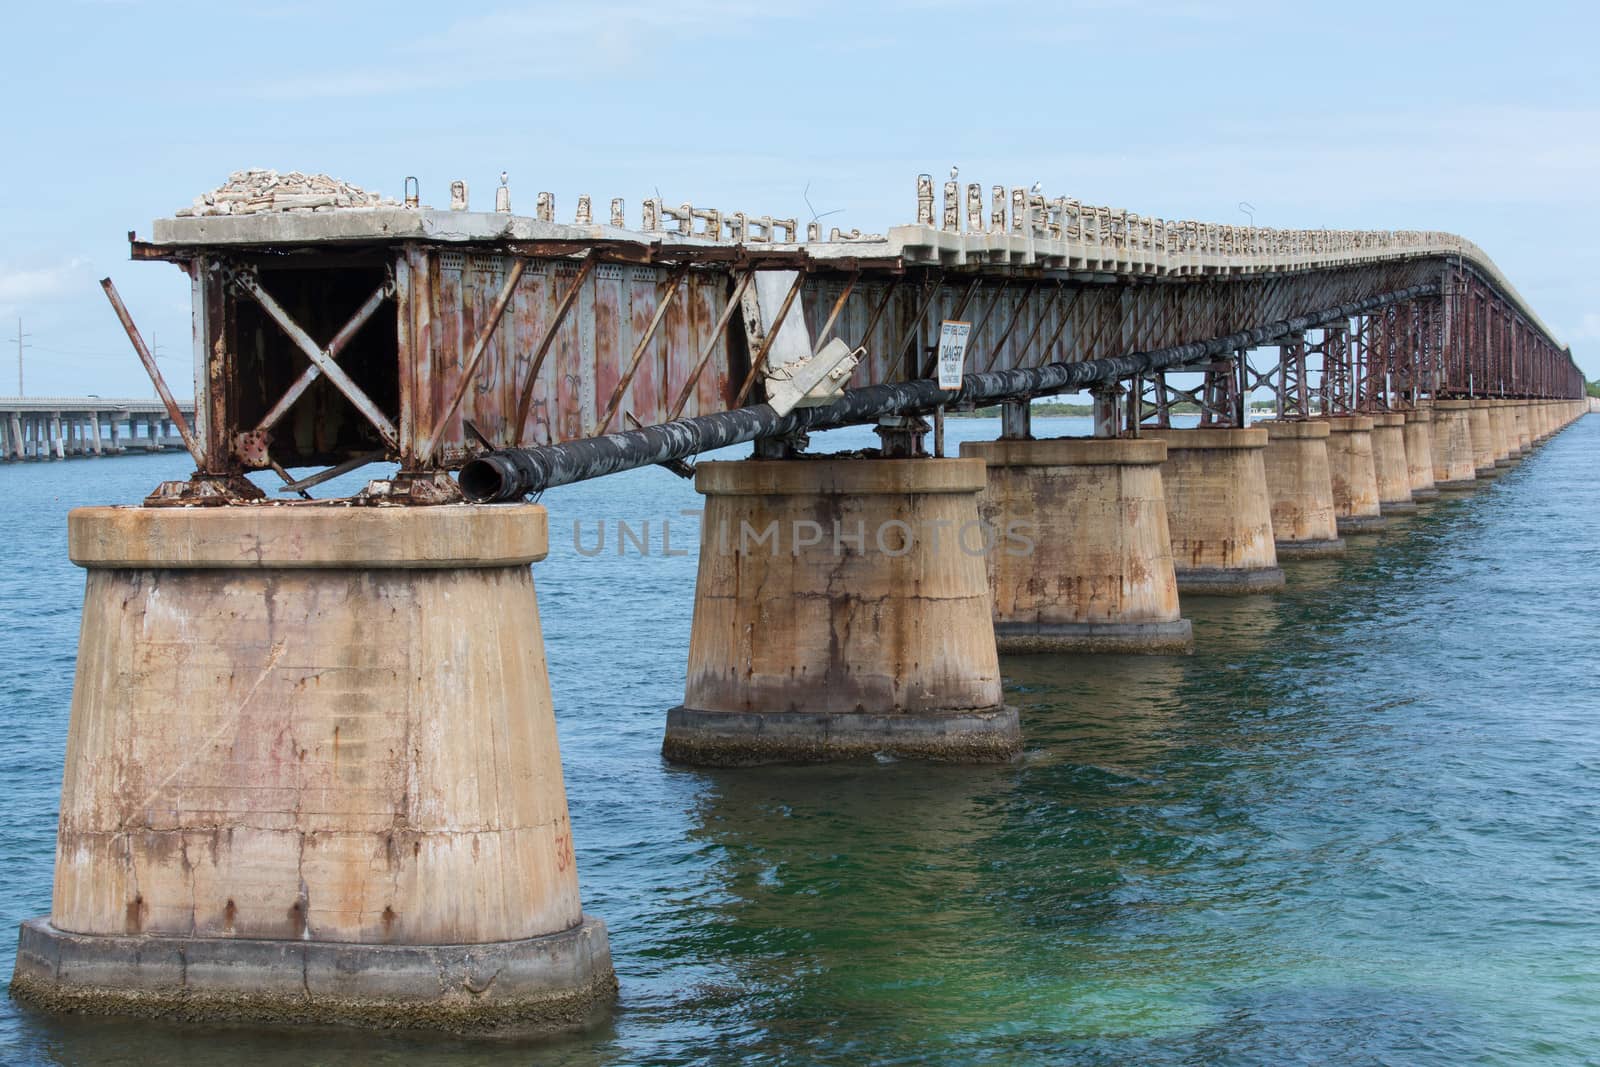 This bridge was built by Henry Flagler as part of the Overseas Railroad to Key West. Later it was converted to a highway by building the road on top of the trusses. It has since been replaced by a modern bridge and is left to slowly deteriorate into the ocean.